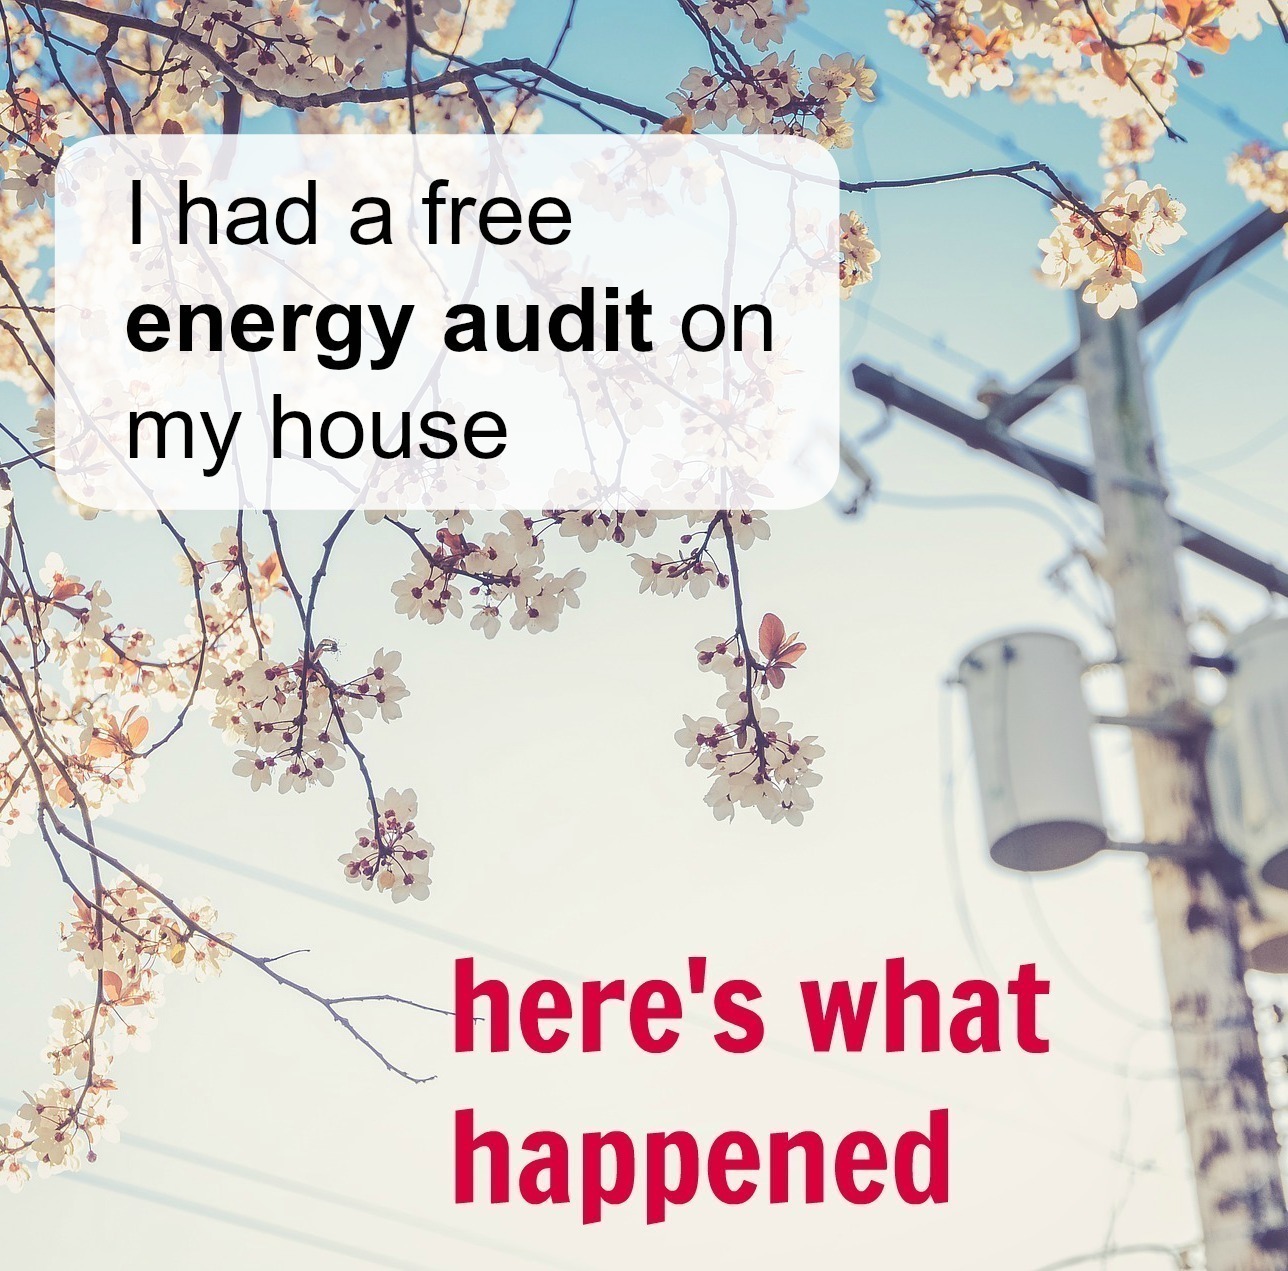 We have a free energy audit on our house. Here's what happened. 